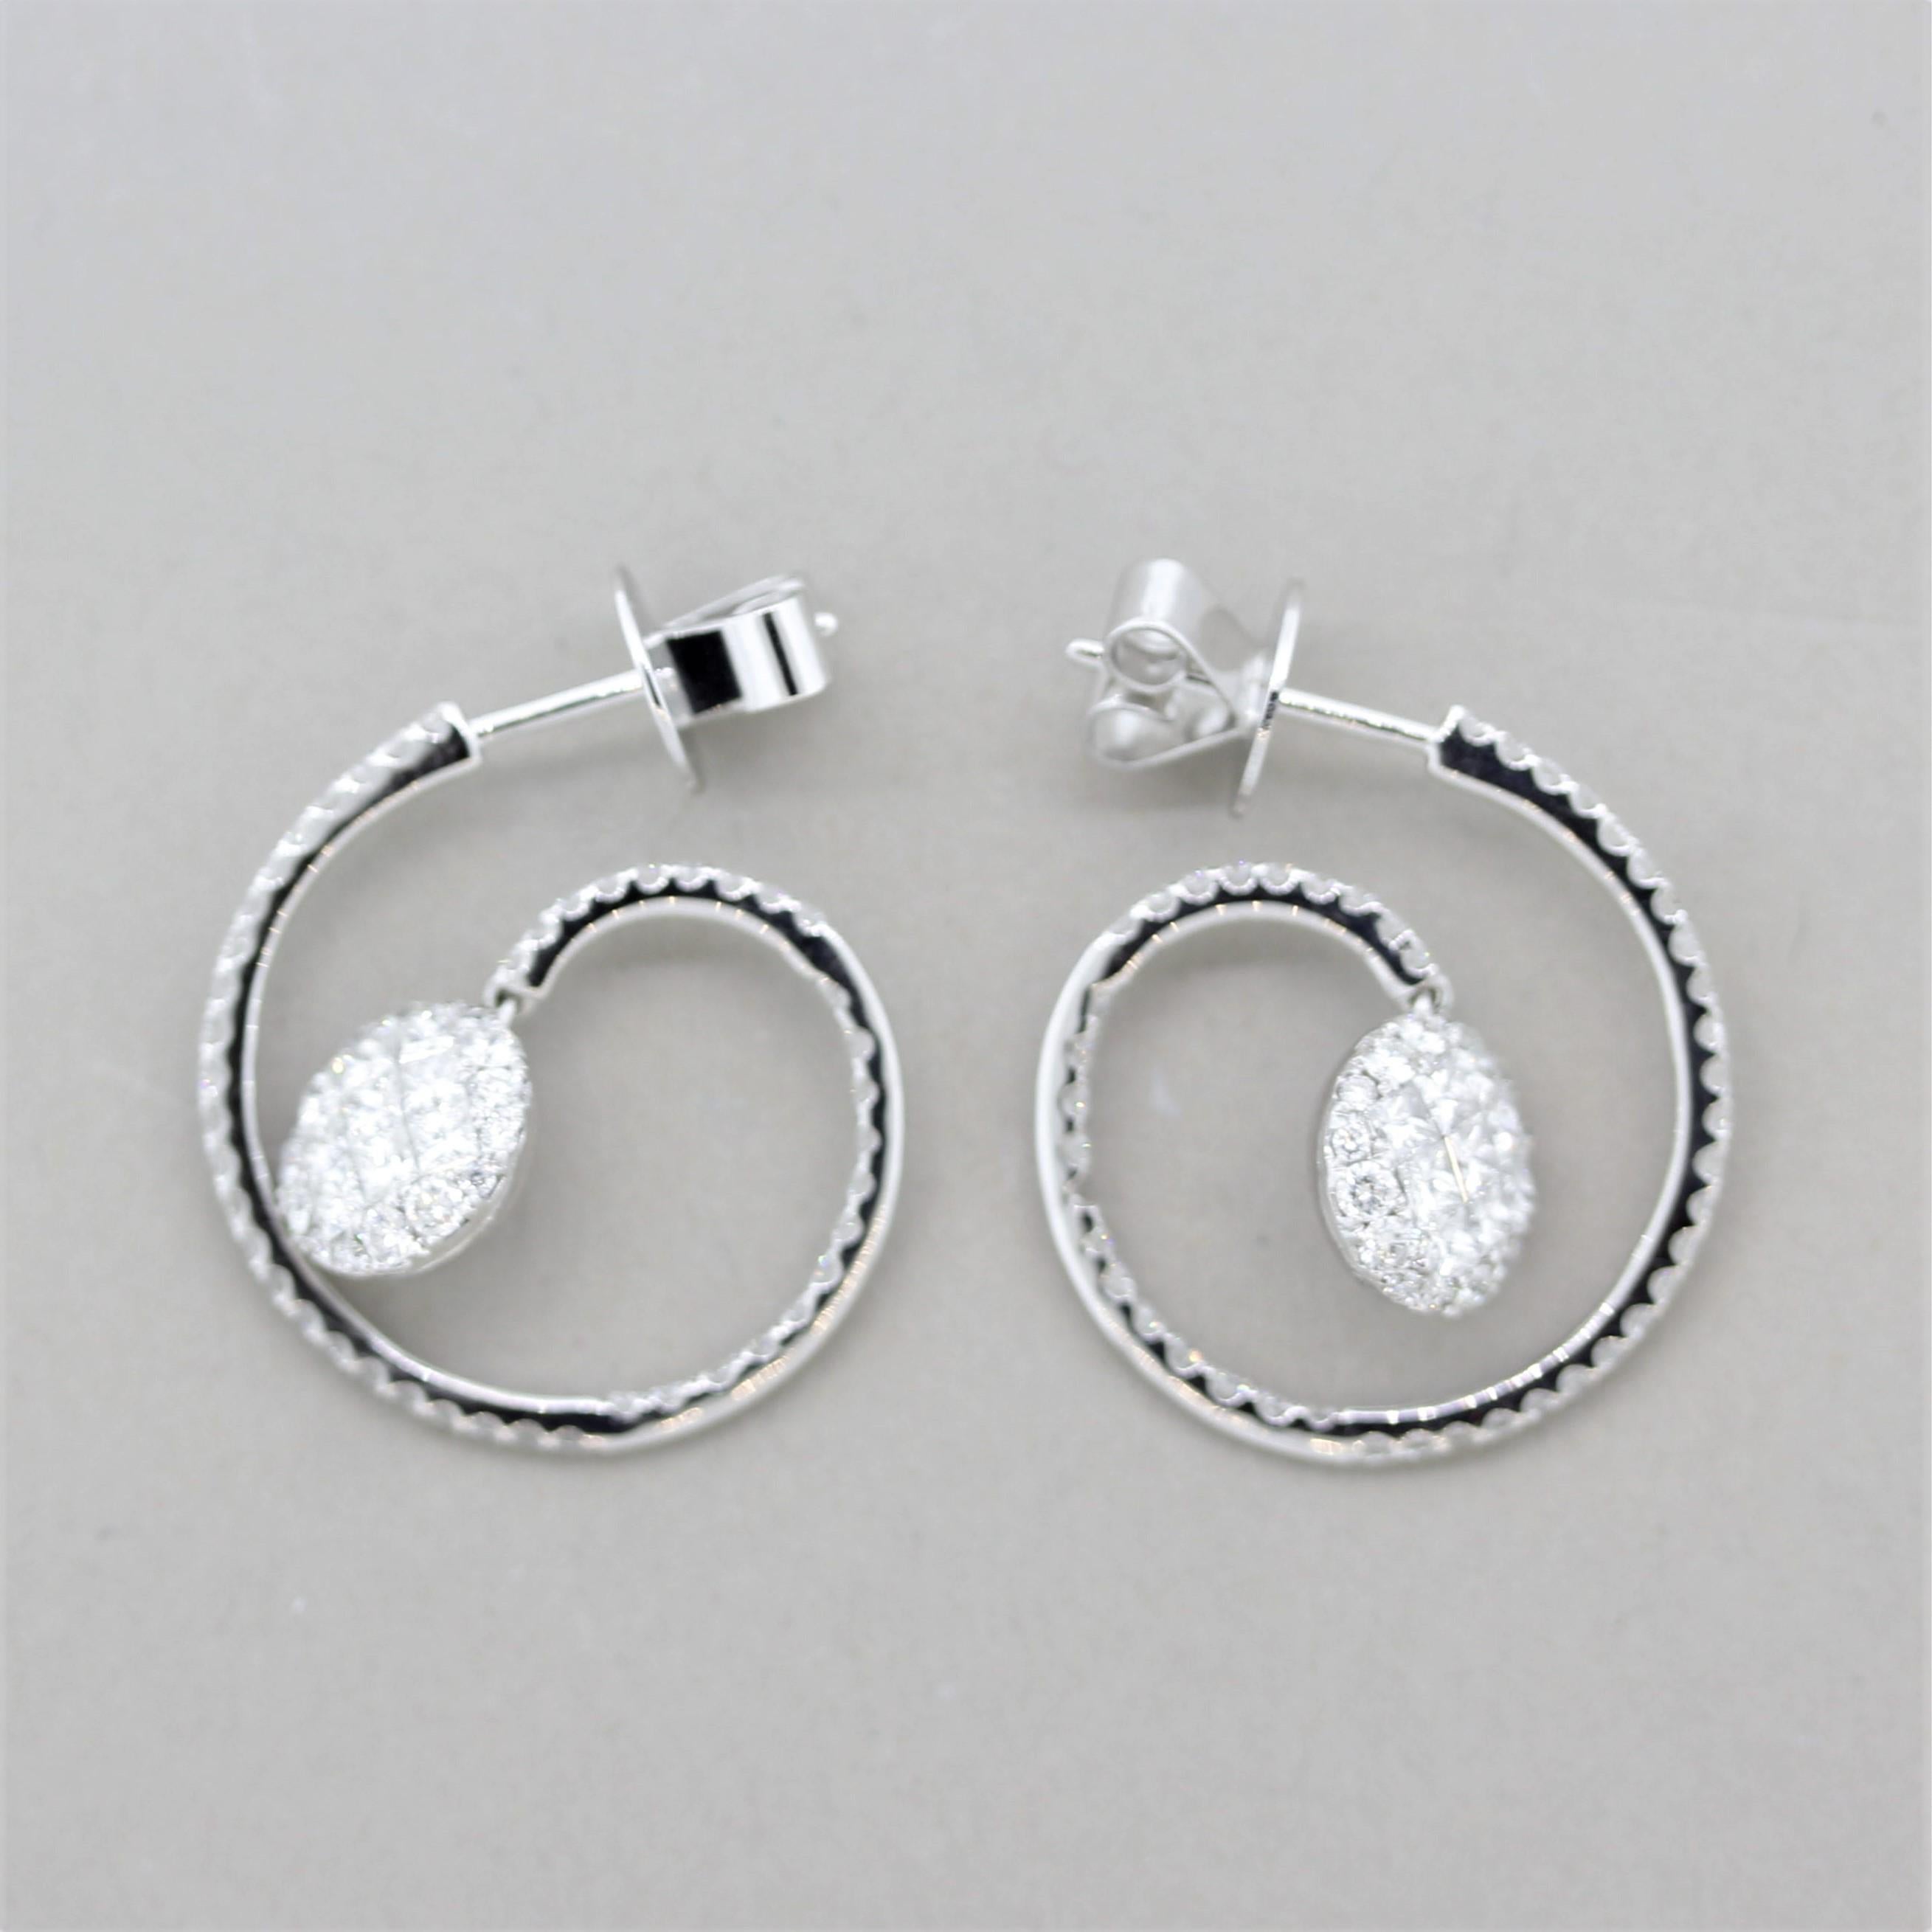 A unique, stylish, and fine pair of diamond earrings! They feature round brilliant-cut diamonds set on the spiral portion of the earrings as well as princess-cut diamonds which are invisibly-set on the round drop portion in the center of the